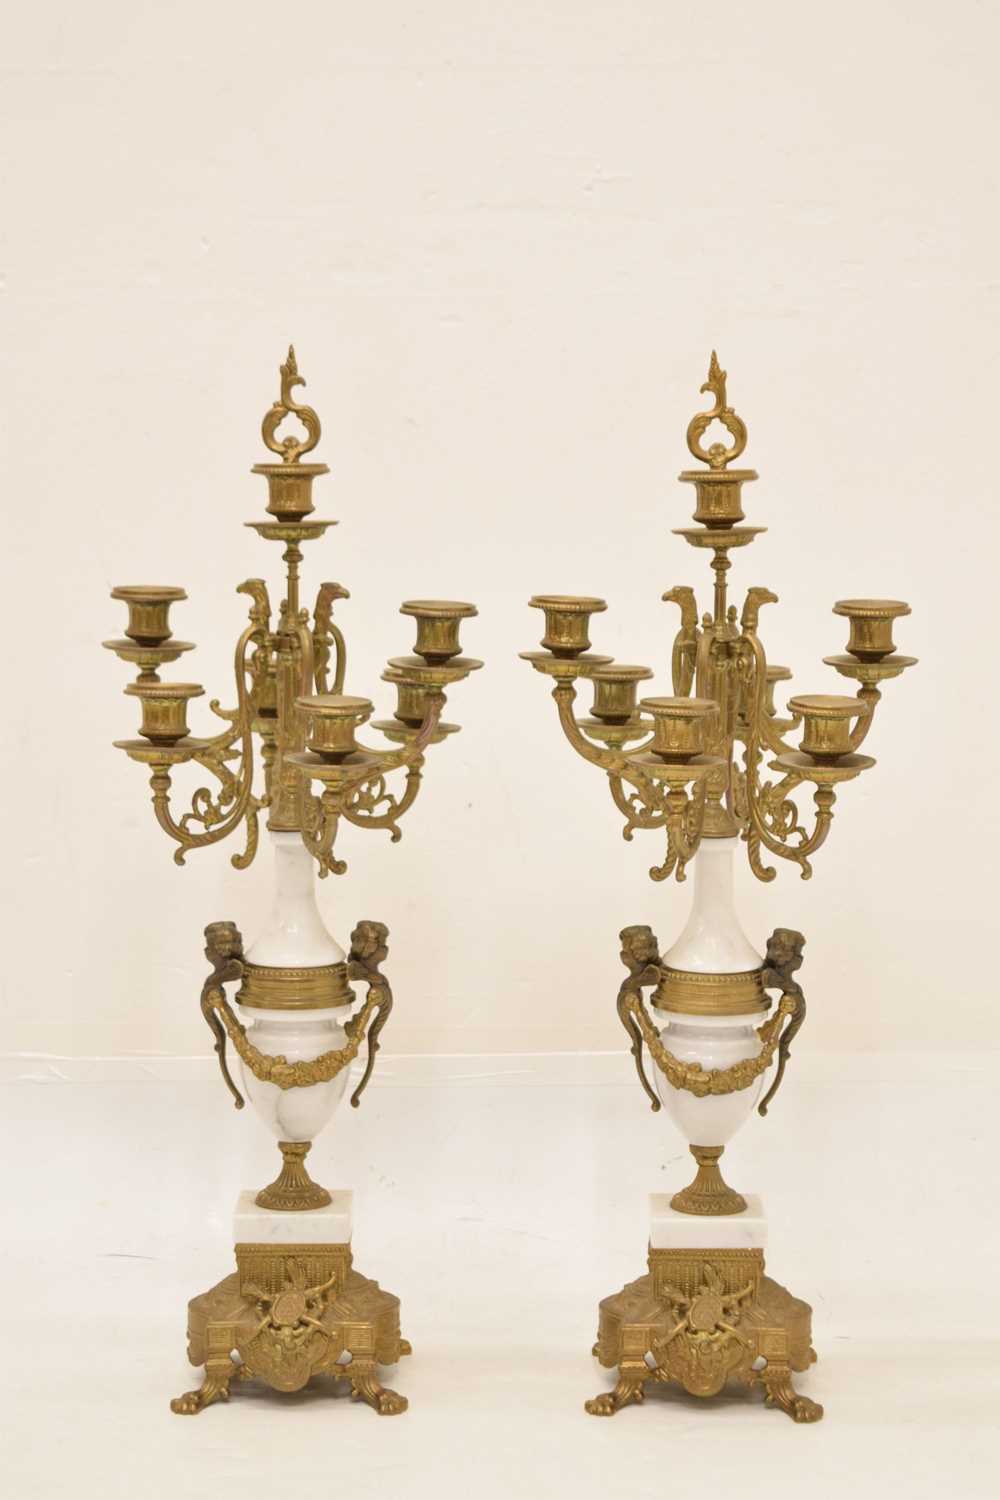 Reproduction French-style three-piece gilt metal and white marble clock garniture - Image 2 of 10